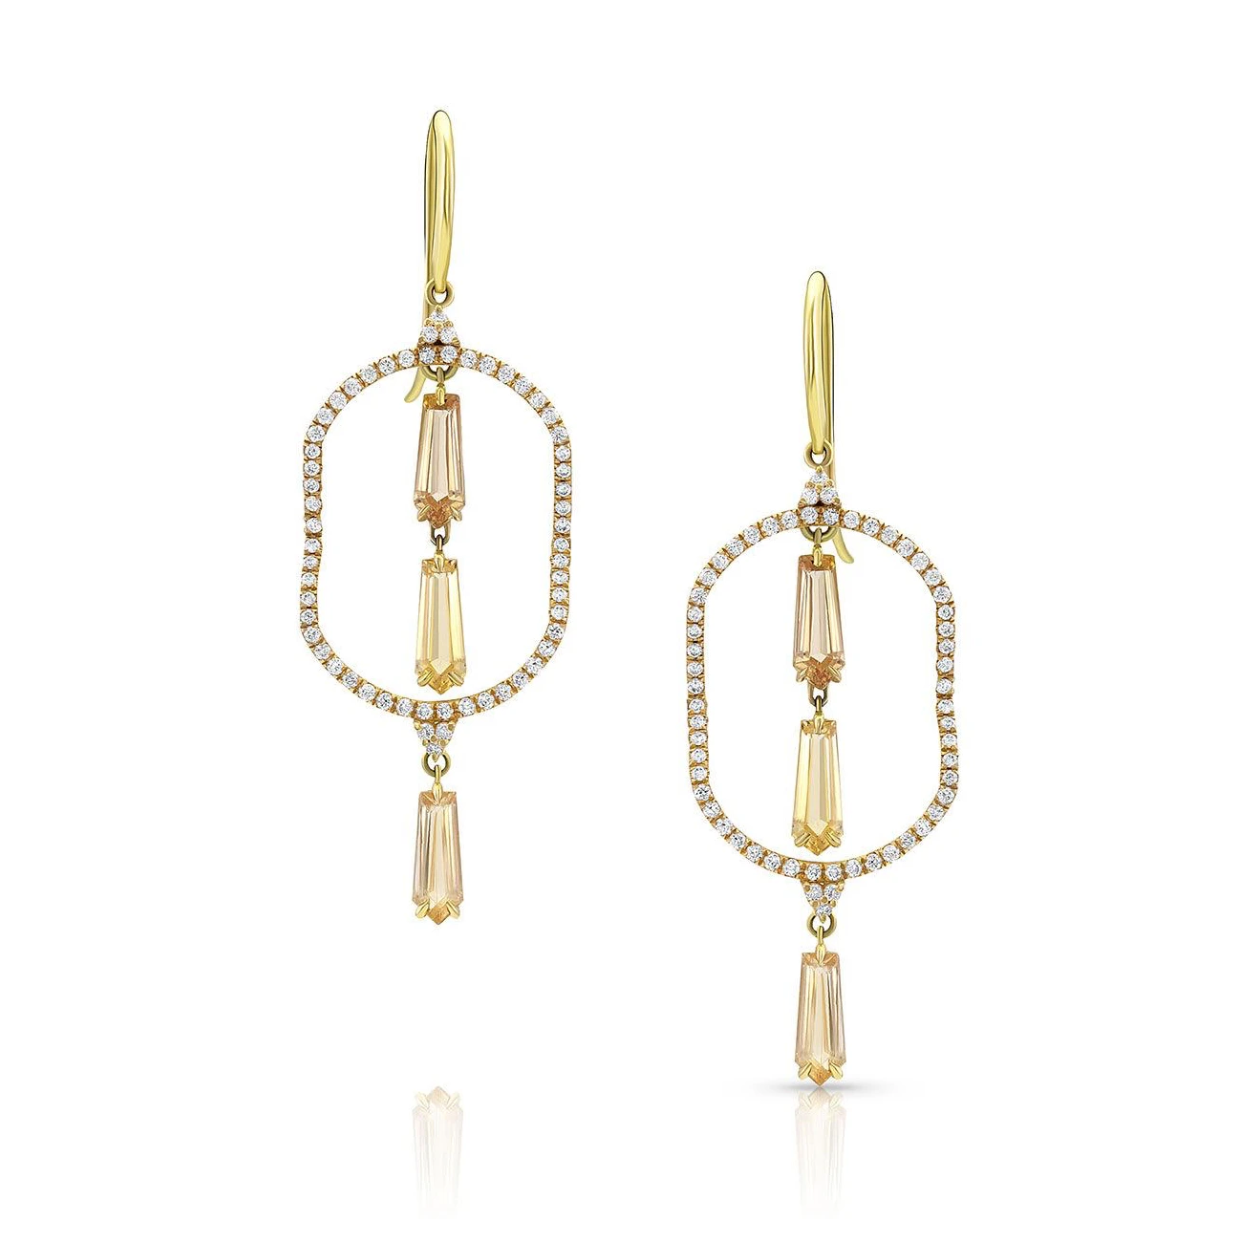 Diamond Shield Imperial Topaz Earrings by Meredith Young